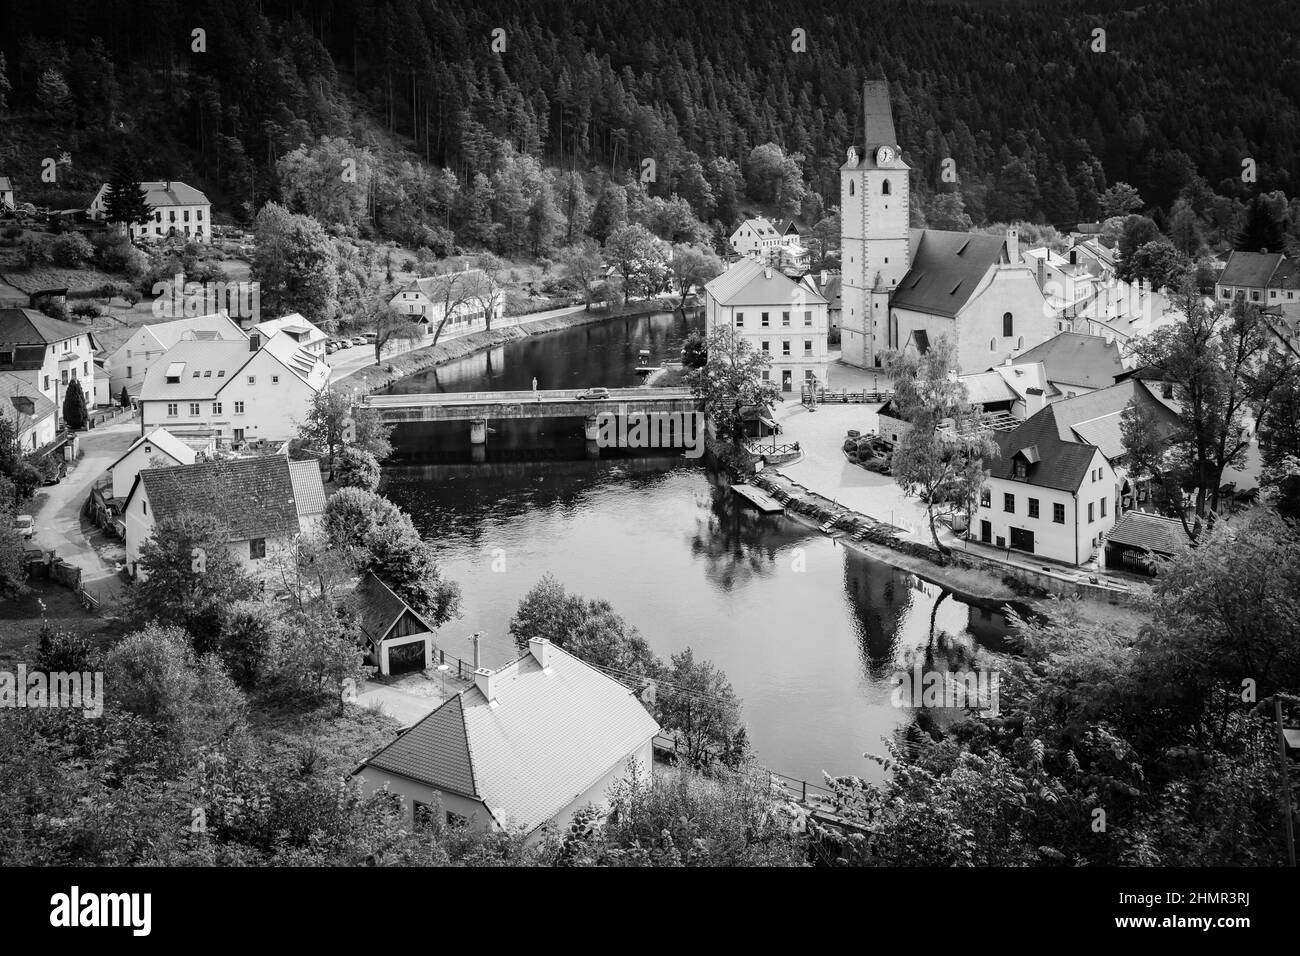 Picturesque old small town in the South Bohemia, Rozmberk nad Vltavou, Czechia. Black and white photography, europen landscape Stock Photo